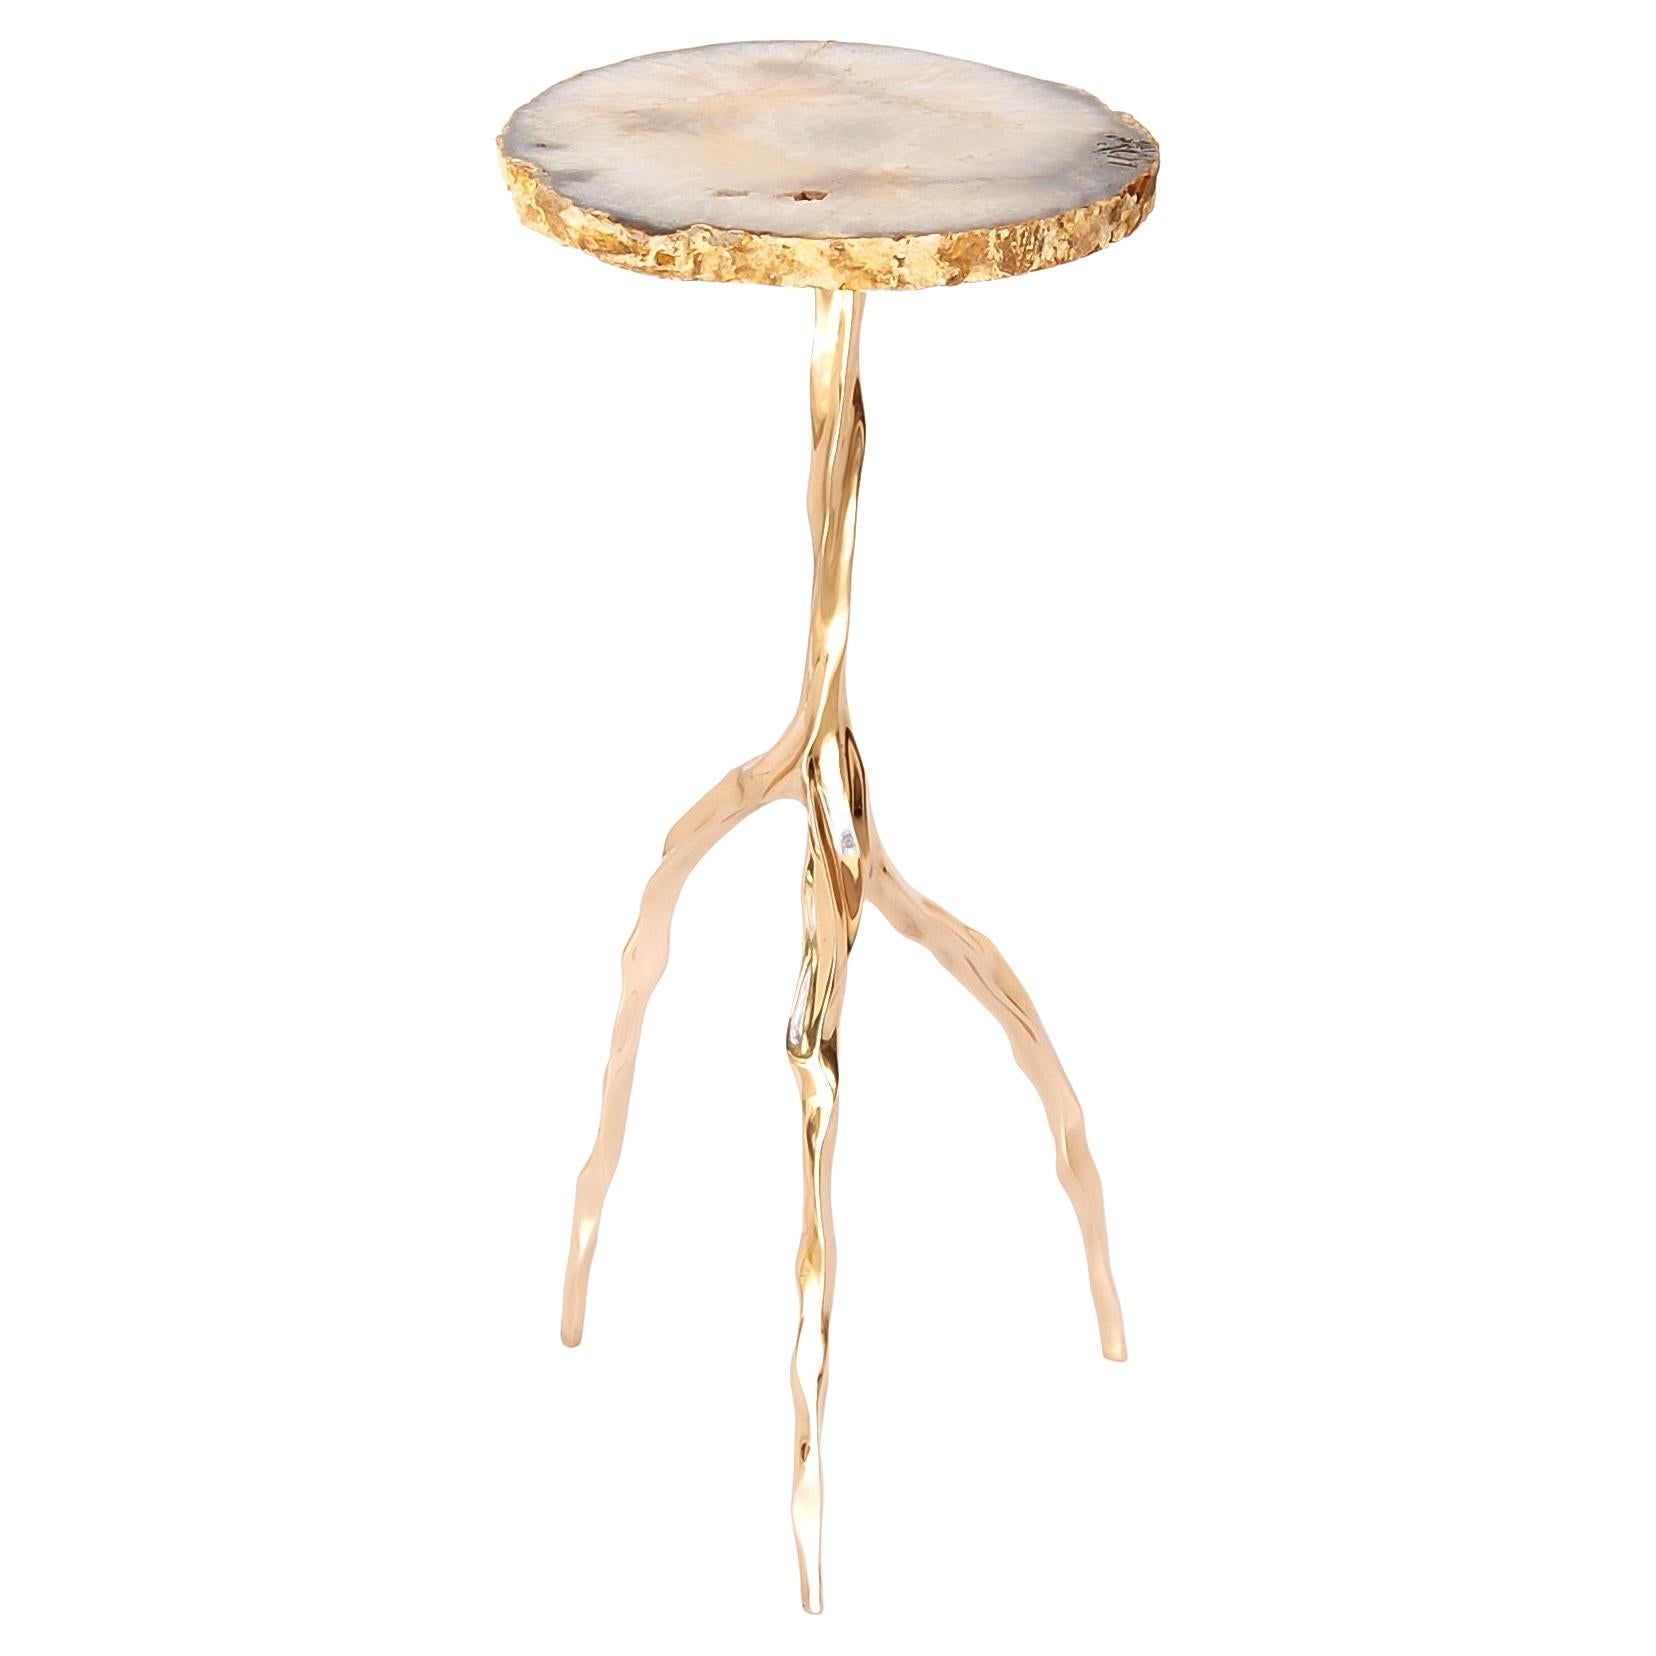 Nina Drink Table with Agate Top by Fakasaka Design